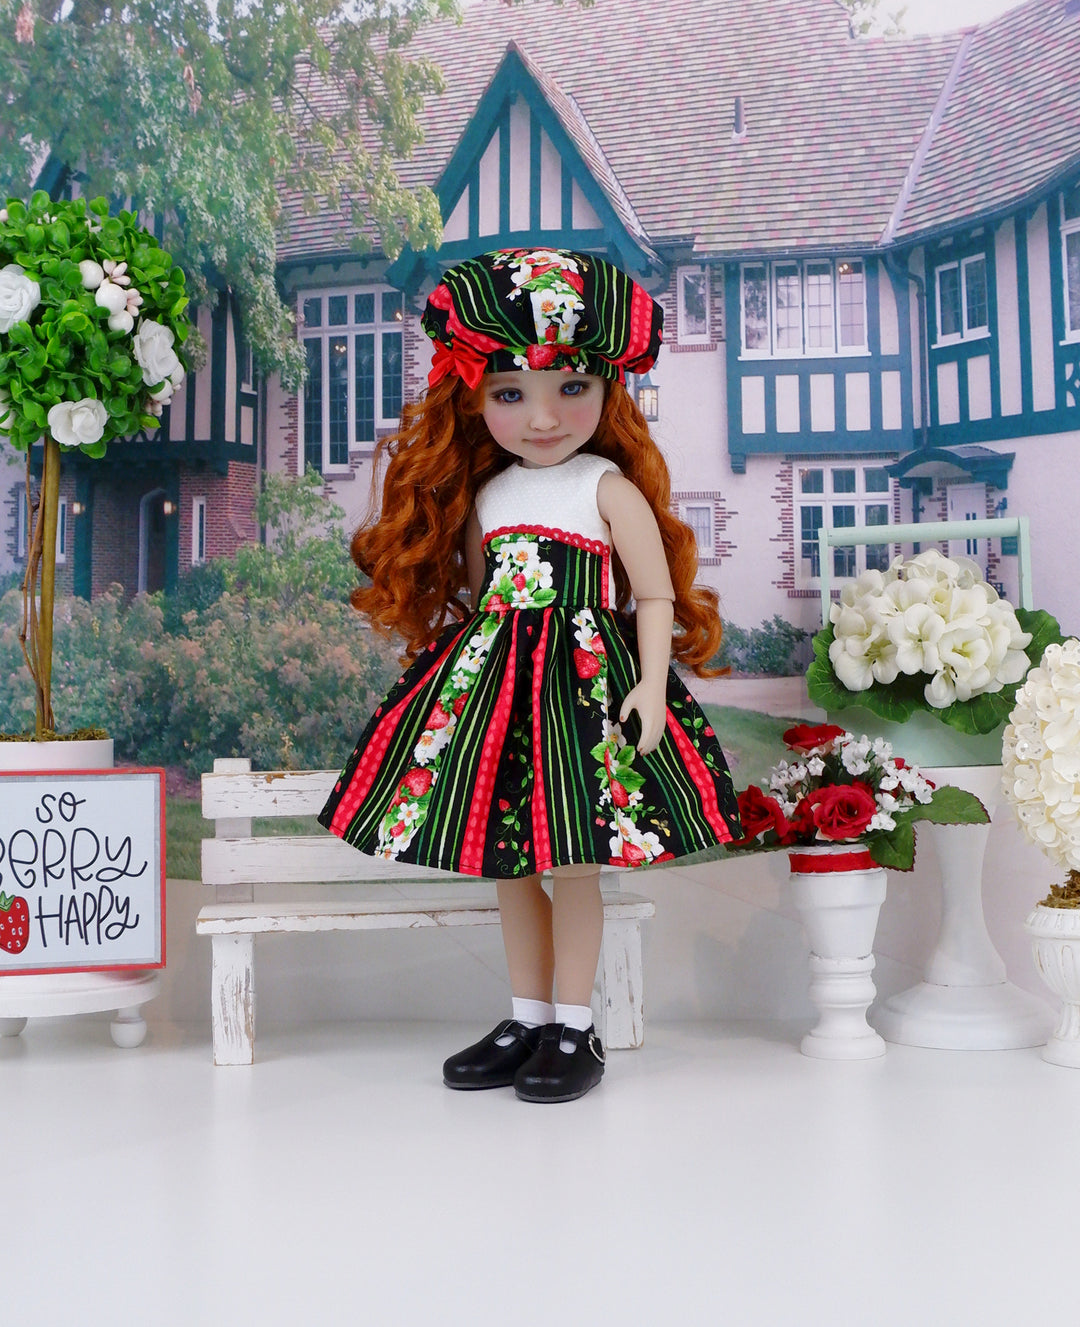 Strawberry Fields - dress and shoes for Ruby Red Fashion Friends doll